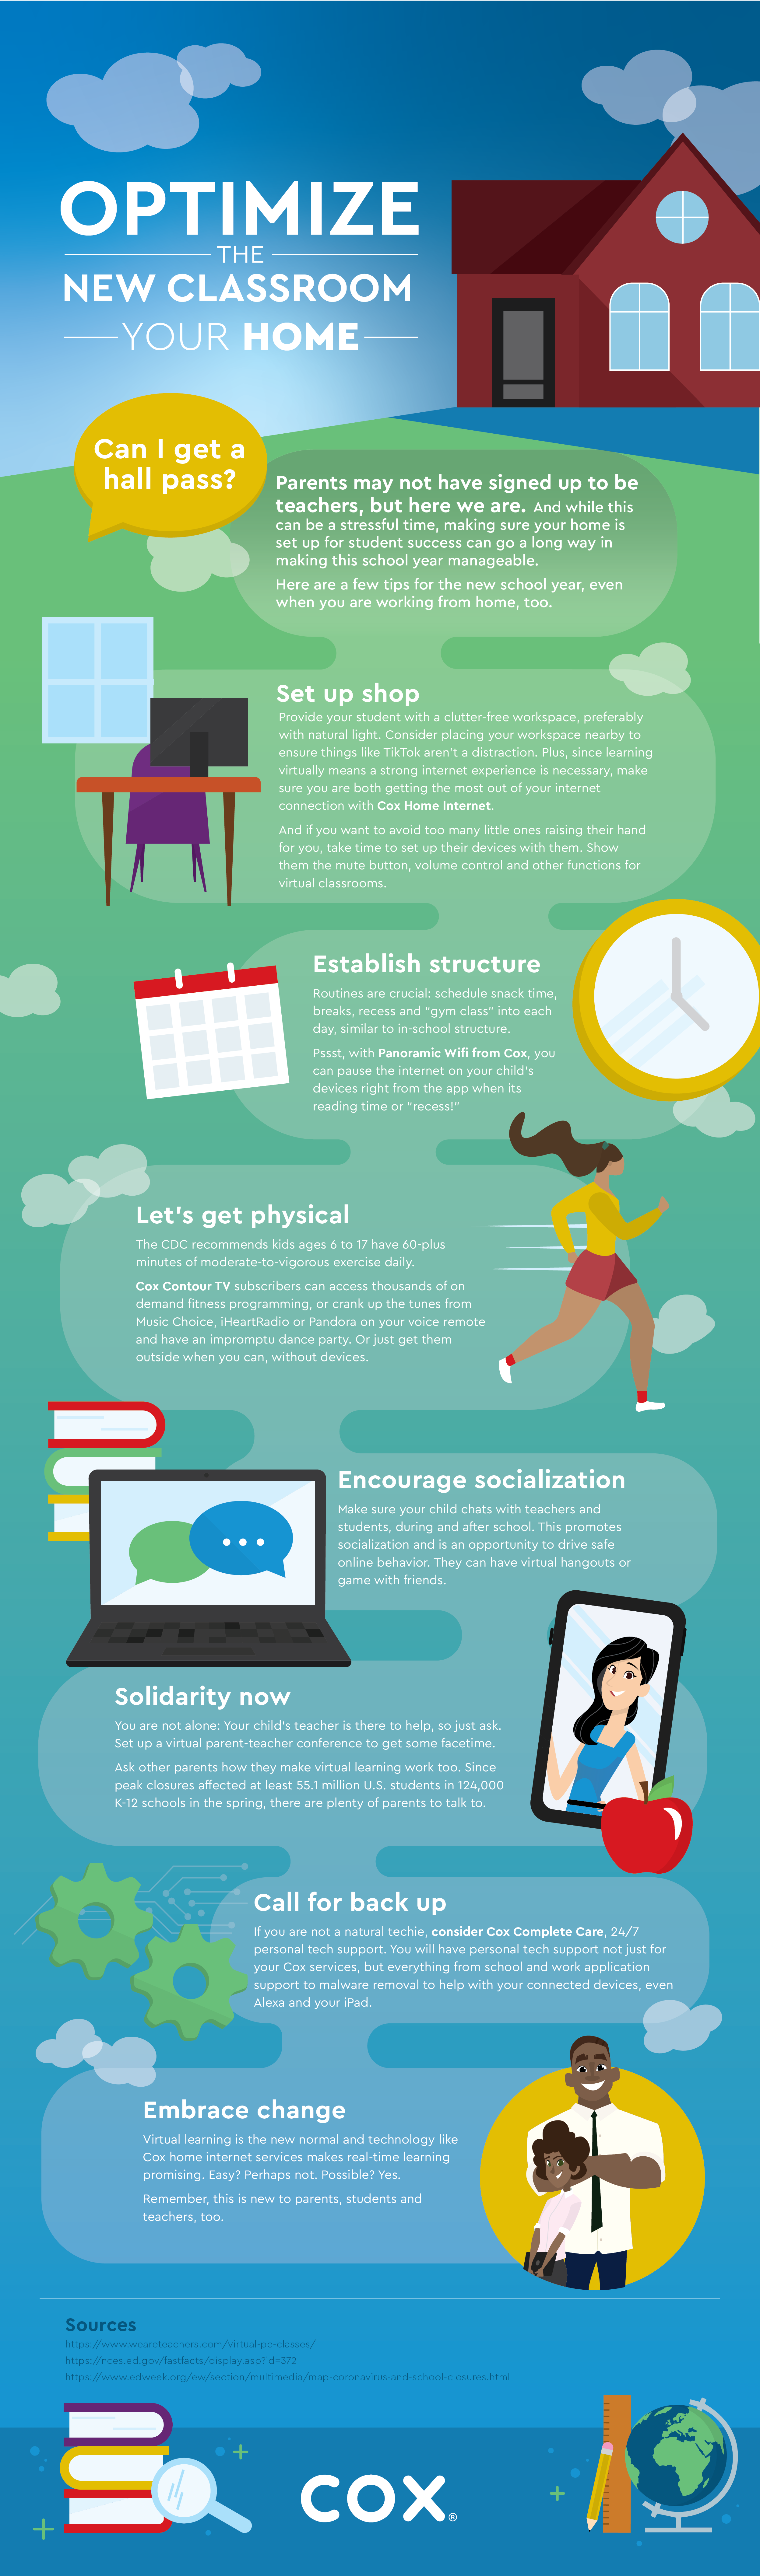 Ways to Optimize Your Home Classroom Infographic